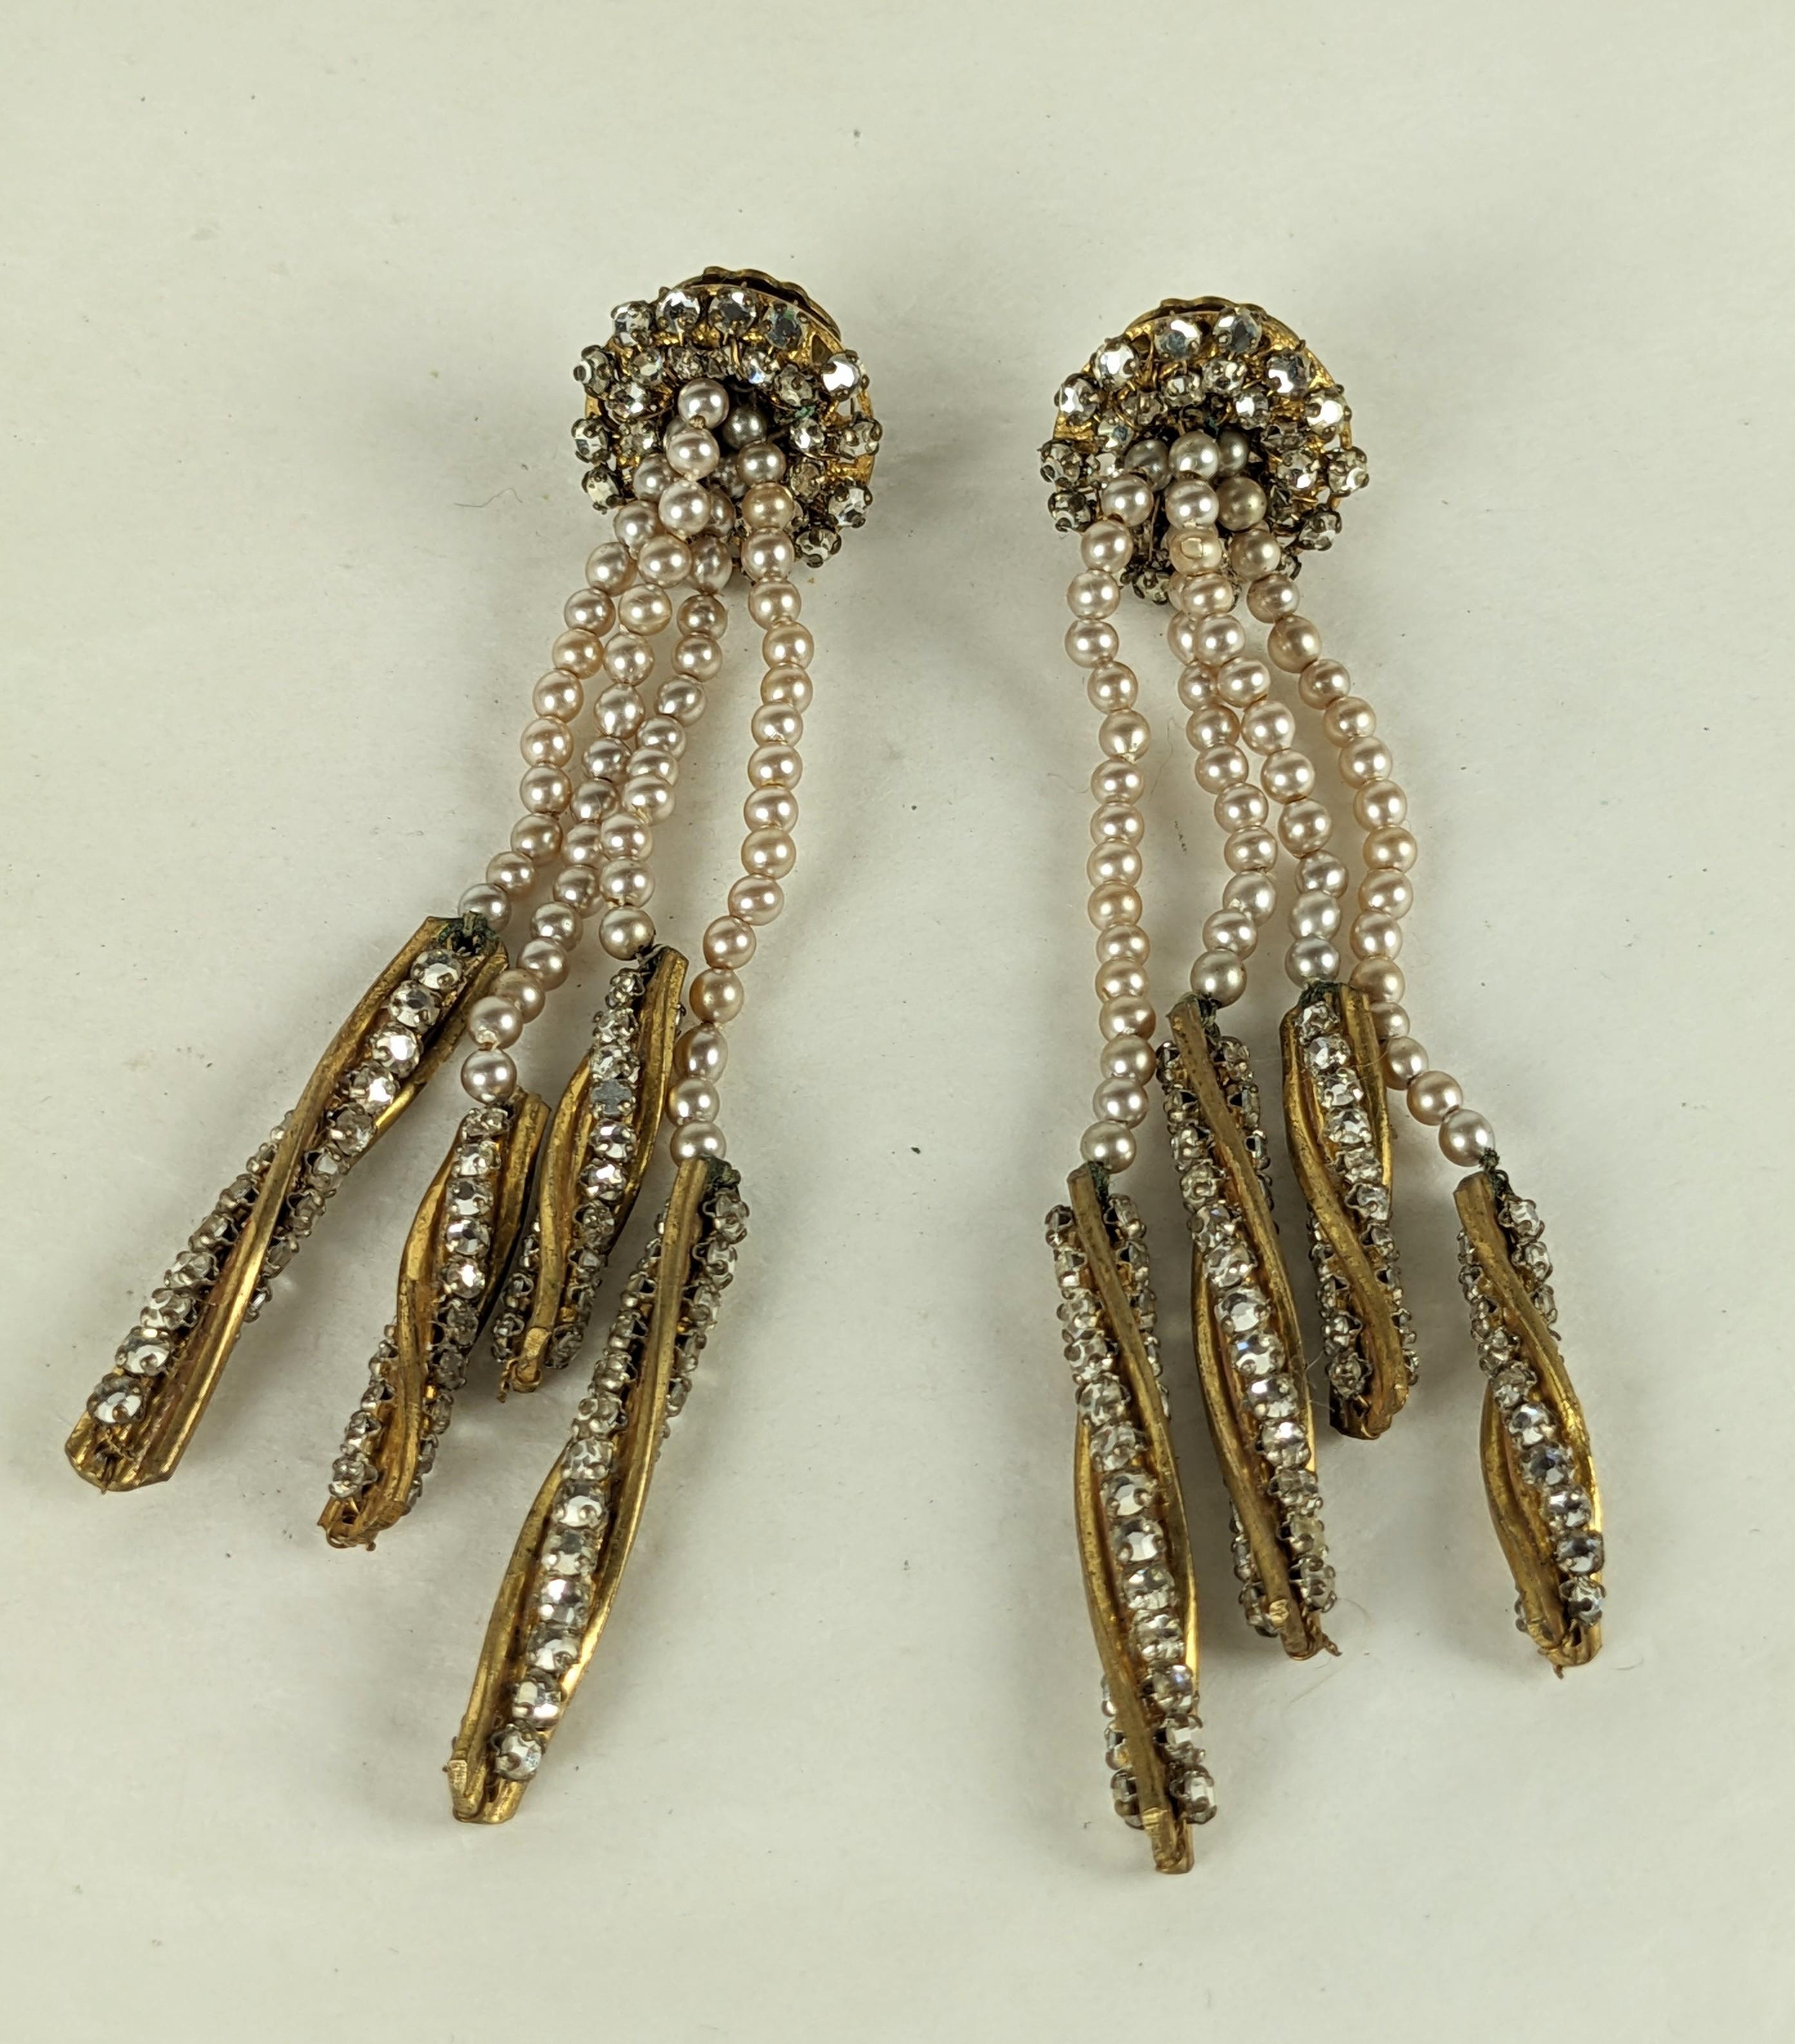 Exceptional Long Miriam Haskell Pearl and Rose Montee Drop Earrings with clip back fittings. Rose Montee crystals are hand sewn on clip as well as on twisted gilt drops which fall from vari length faux pearls. Super striking scale. 1950's USA. 